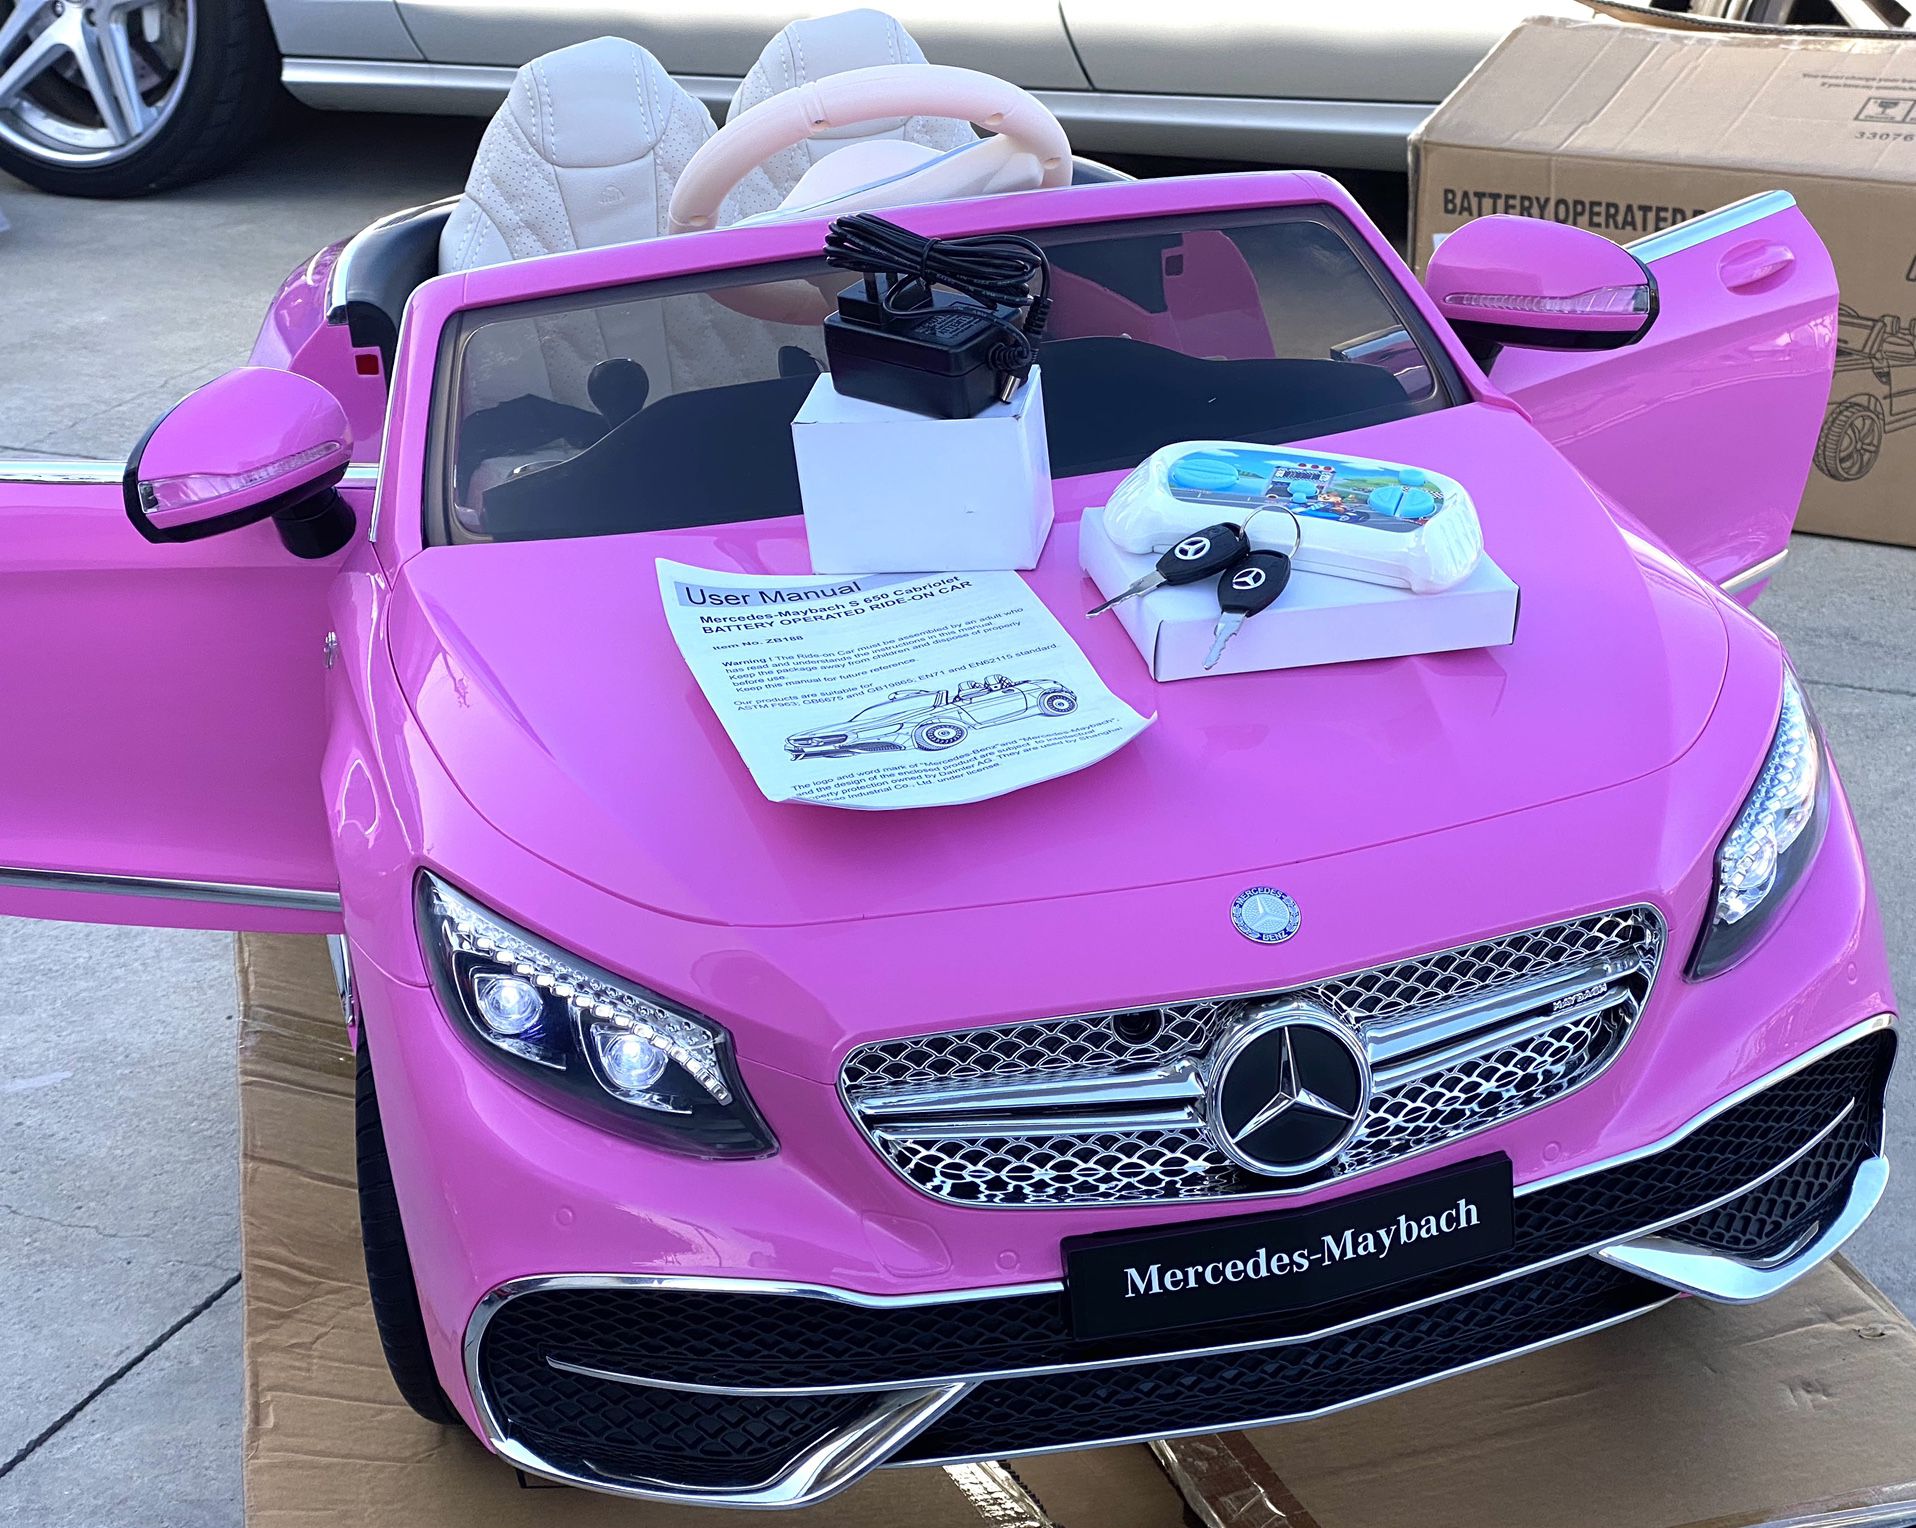 BRAND NEW Pink Mercedes Benz Maybach S650 12volt REMOTE CONTROL MODEL MODEL Electric Kid Ride On Car power wheels Real Leather Seat & Rubber Tires